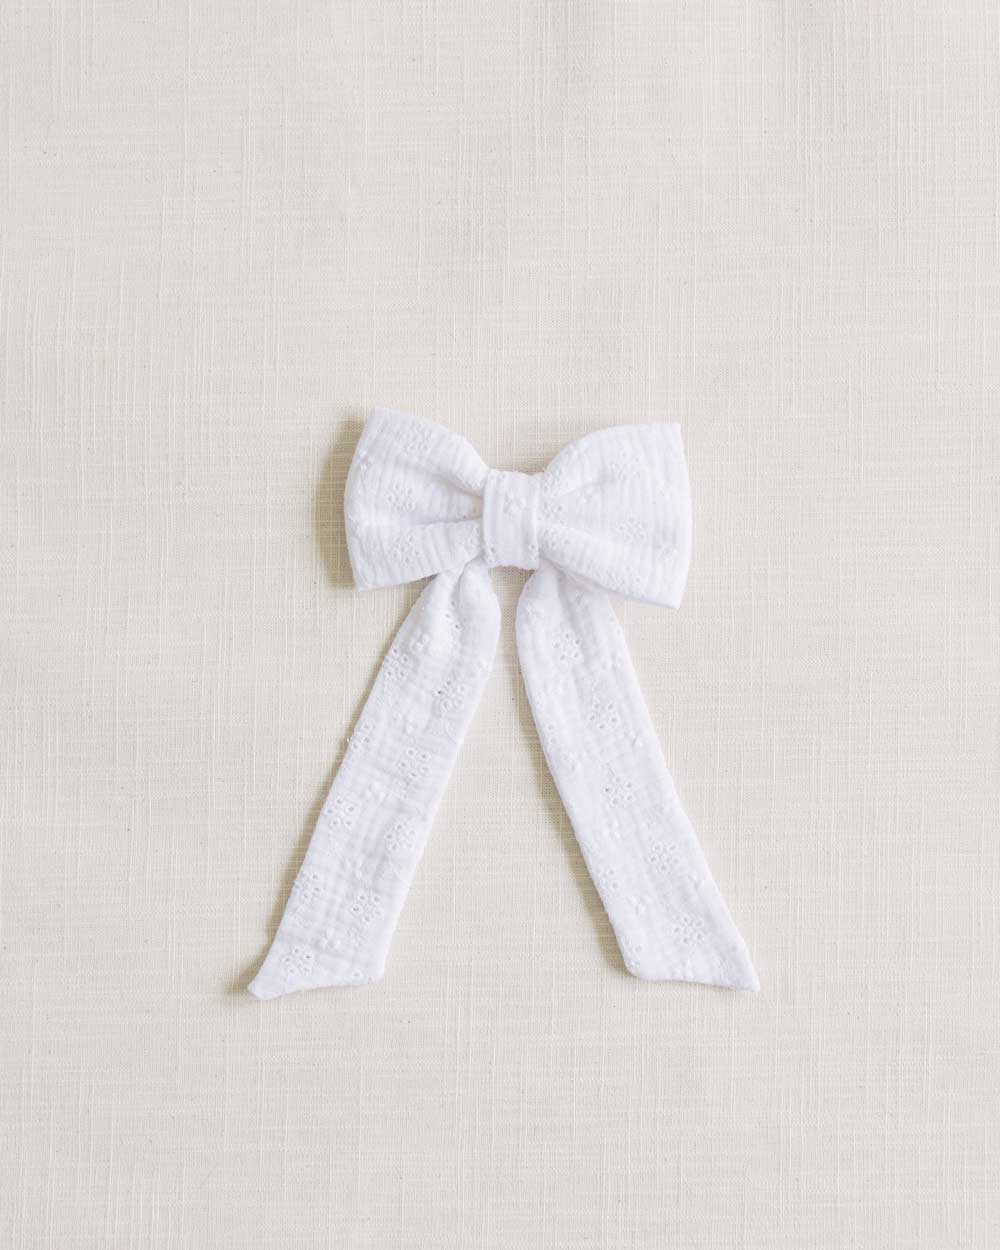 THE BRODERIE ANGLAISE CHILDREN'S BOW